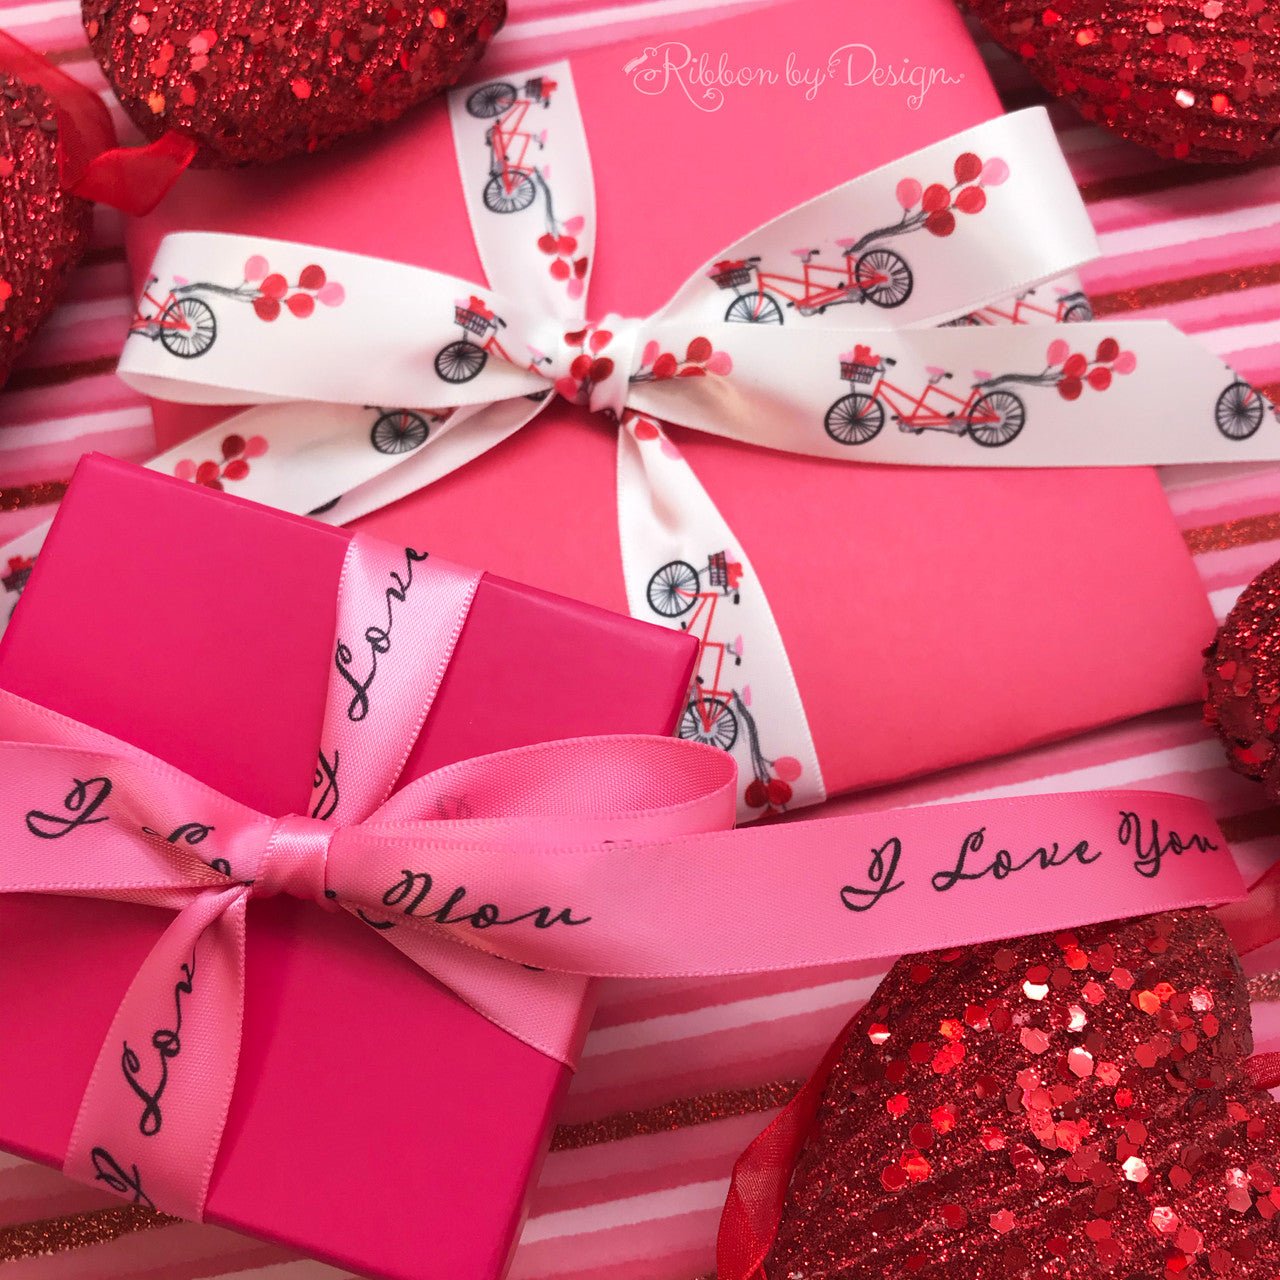 Mix and match our I Love Your ribbon with any of our Valentine collection ribbons for a truly special look for Valentine parties, gifts and decor!